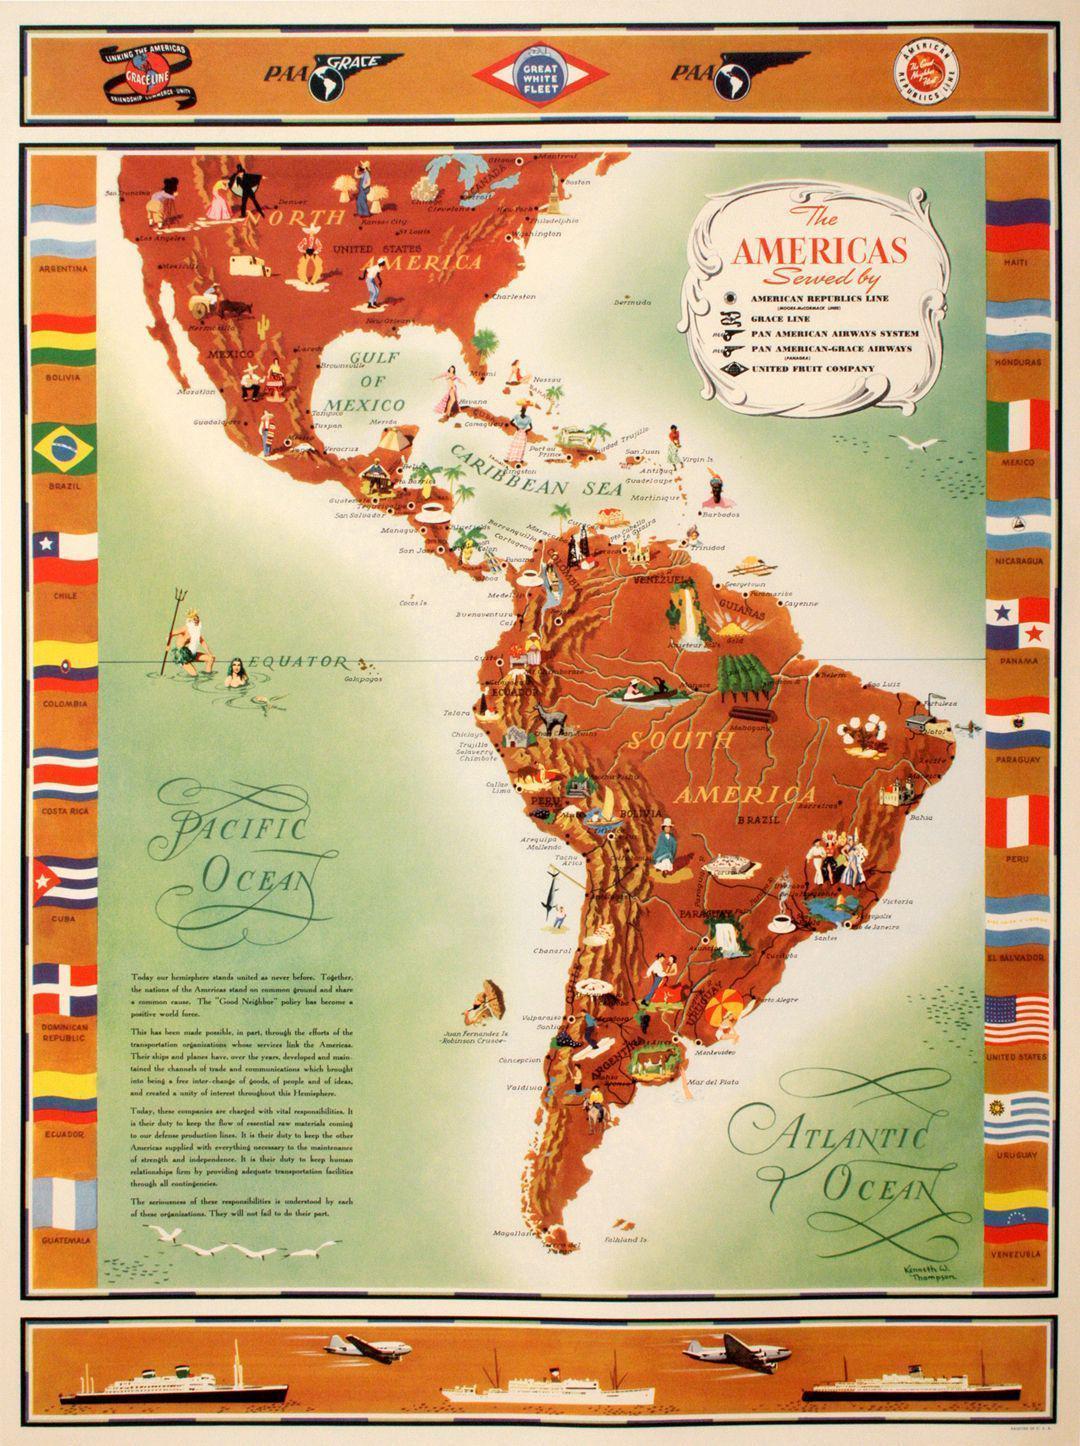 Original Pan Am - The Americas South America Vintage Map by Kenneth W. Thompson c1945